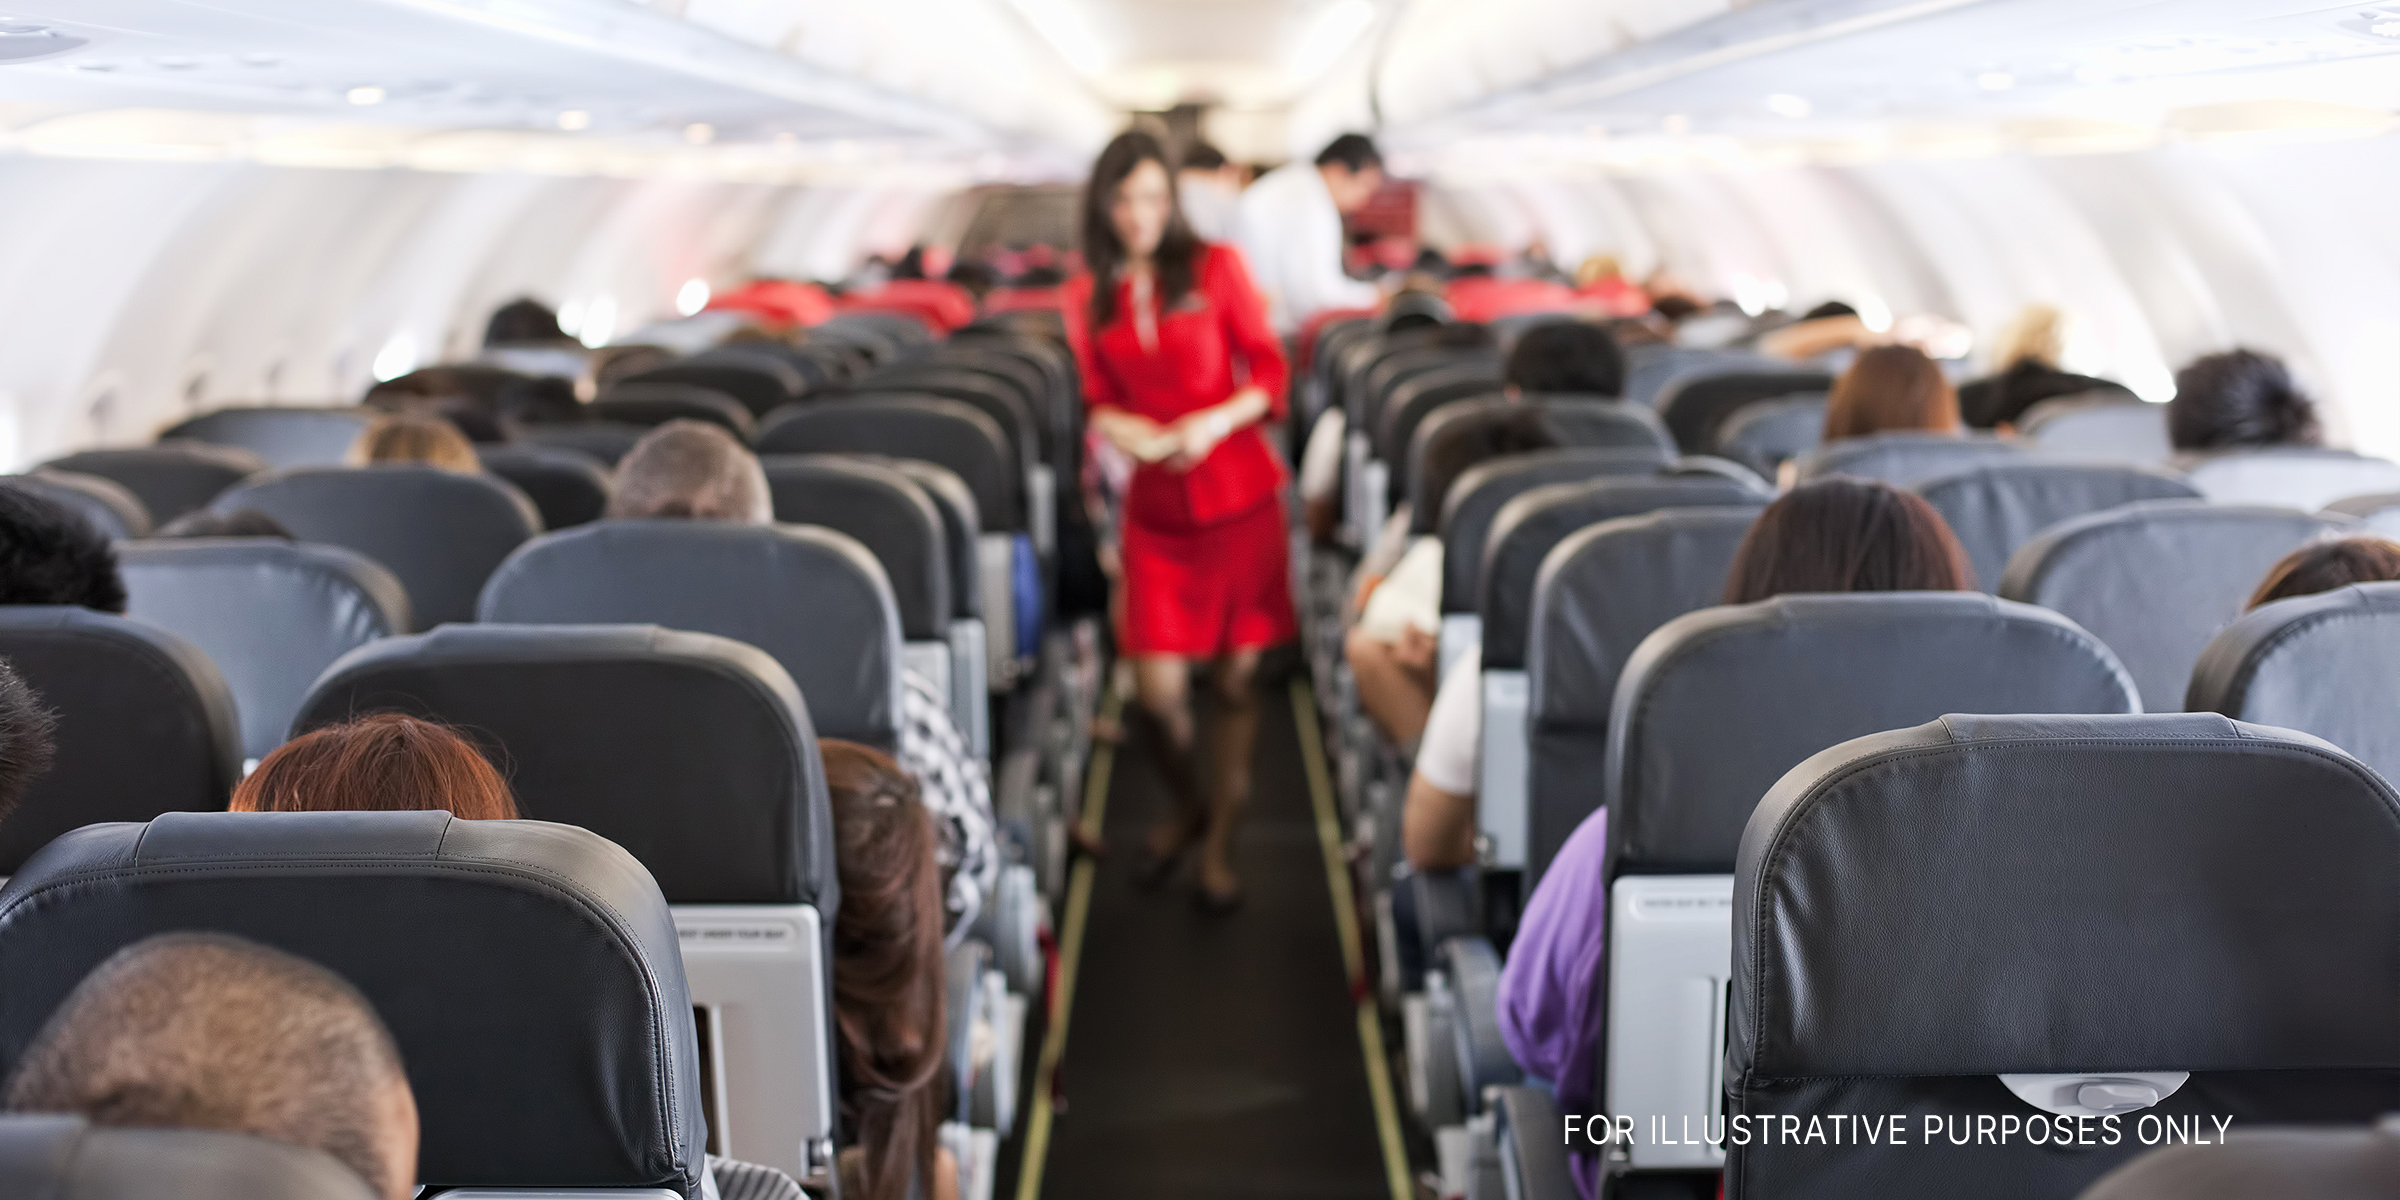 People on a plane | Source: Getty Images